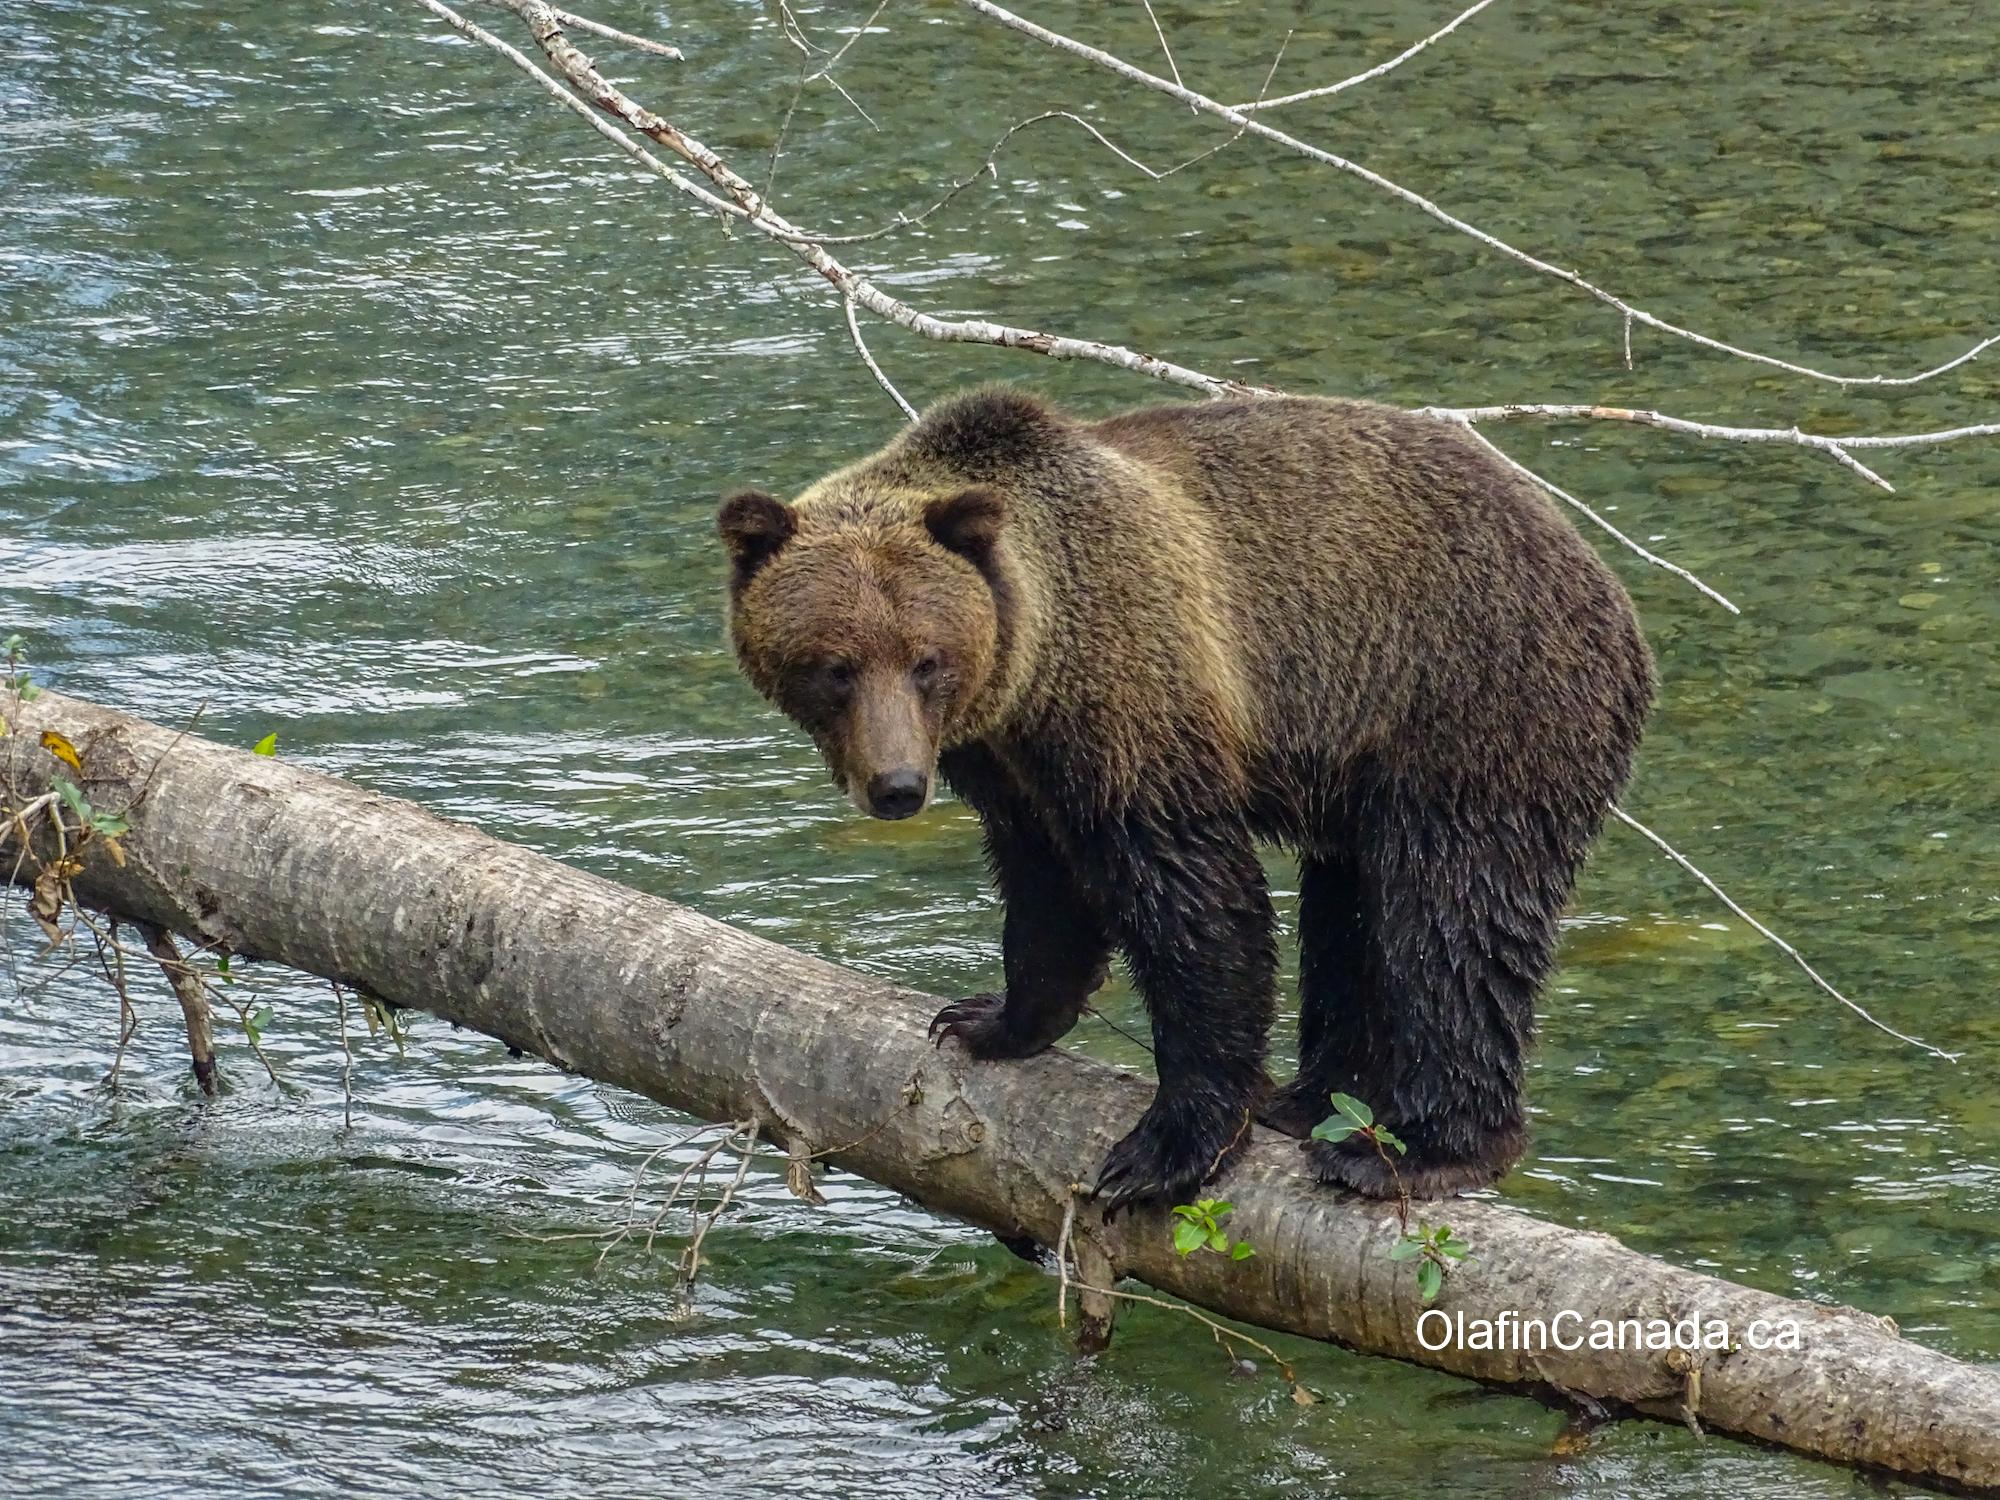 Big grizzly bear balancing on a tree in Bute Inlet #olafincanada #britishcolumbia #discoverbc #buteinlet #wildlife #grizzlybear